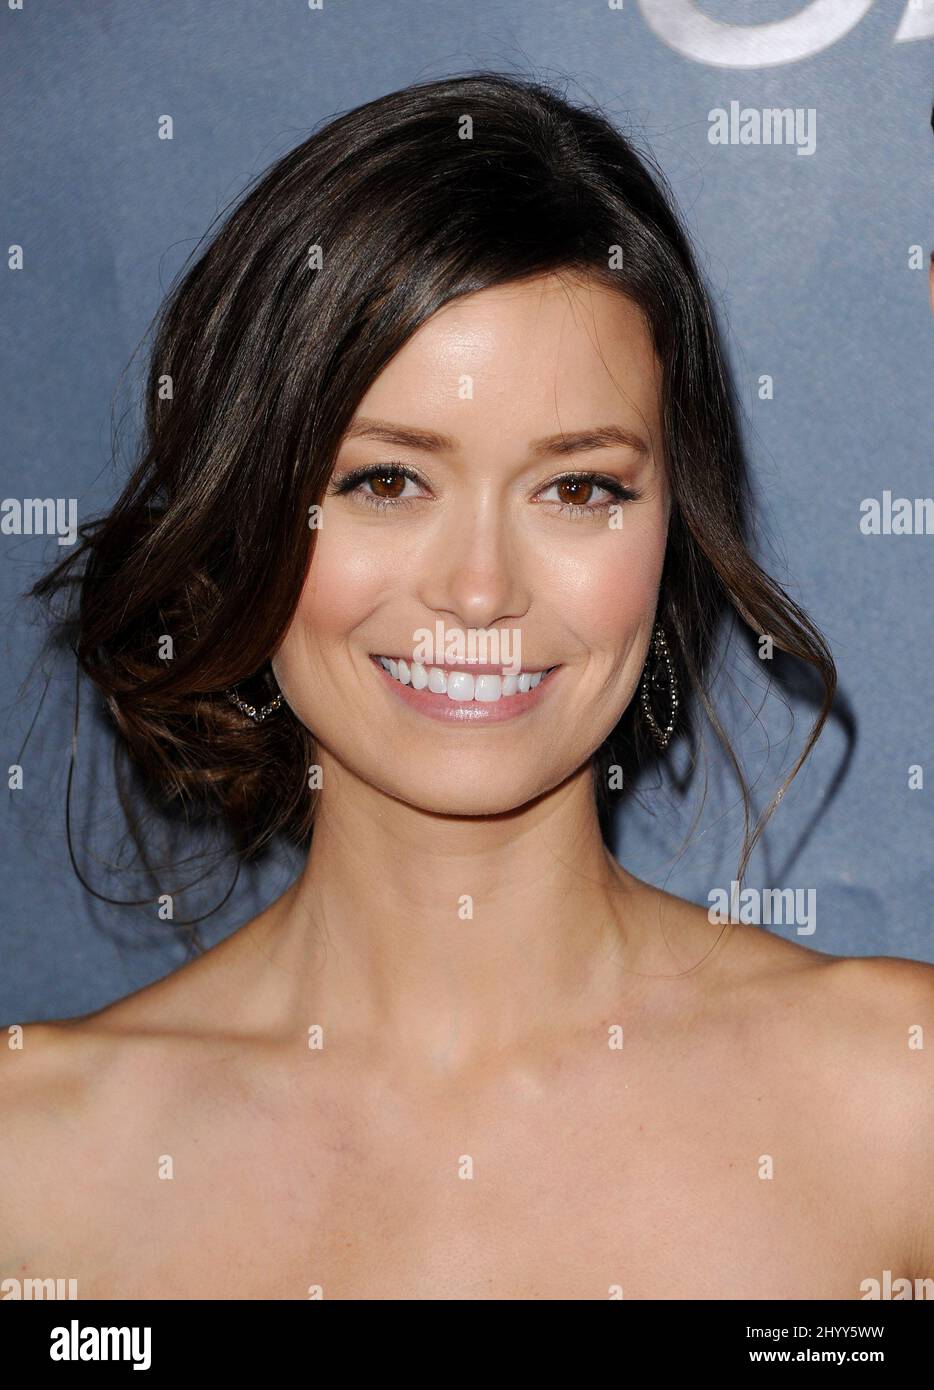 Summer Glau arriving at The Cape Premiere held at Music Box Theater in Los Angeles, USA. Stock Photo